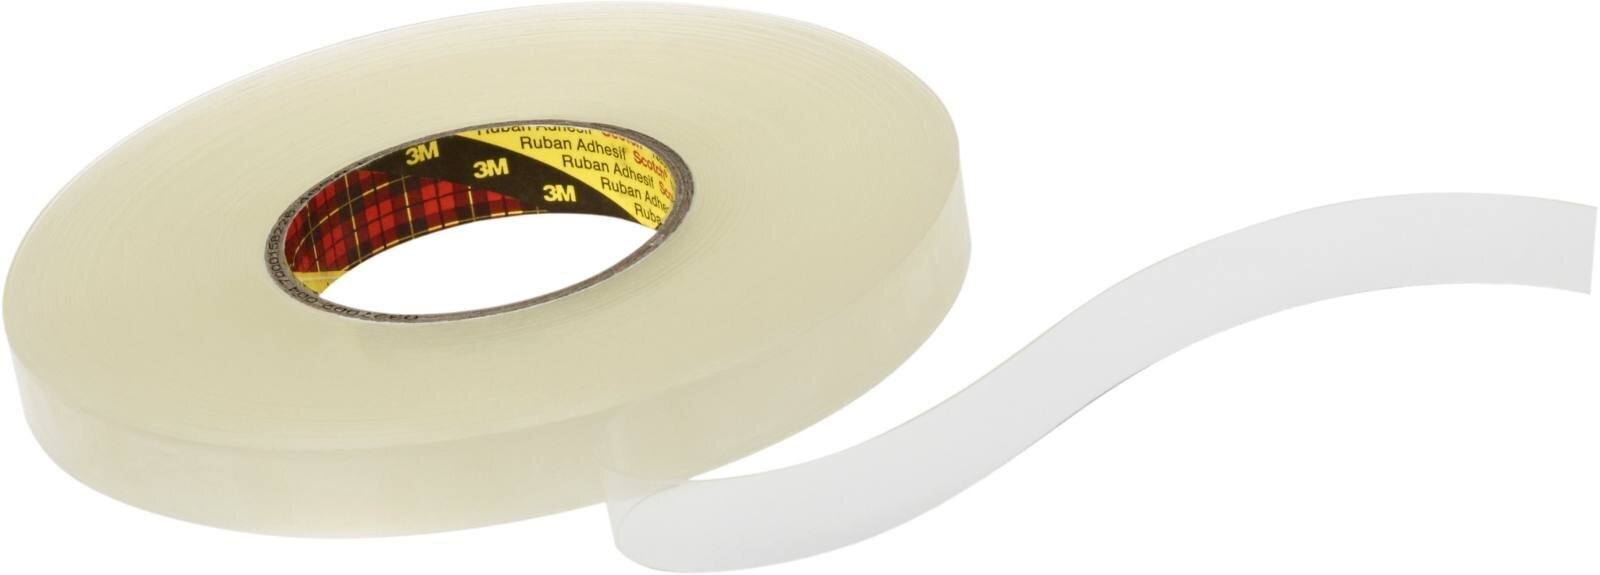 3M Double-sided removable adhesive tape 4658F, transparent, 25 mm x 25 m, 0.8 mm